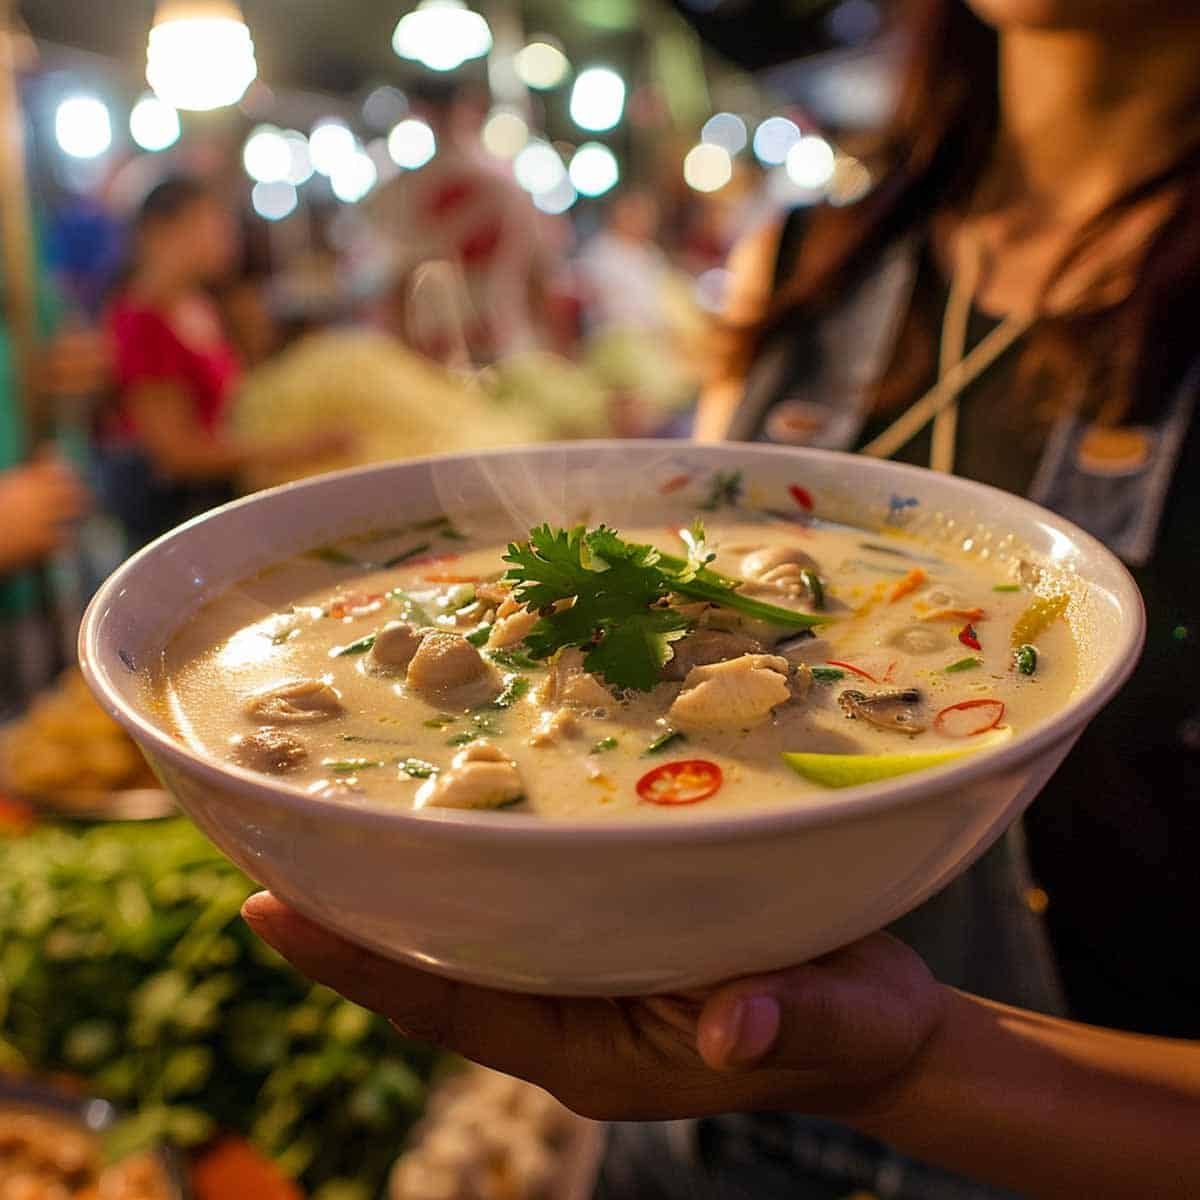 A bowl of Thai Coconut Chicken Soup (Tom Kha Gai) being served at a bustling night market, with vibrant lights and colorful stalls in the background.